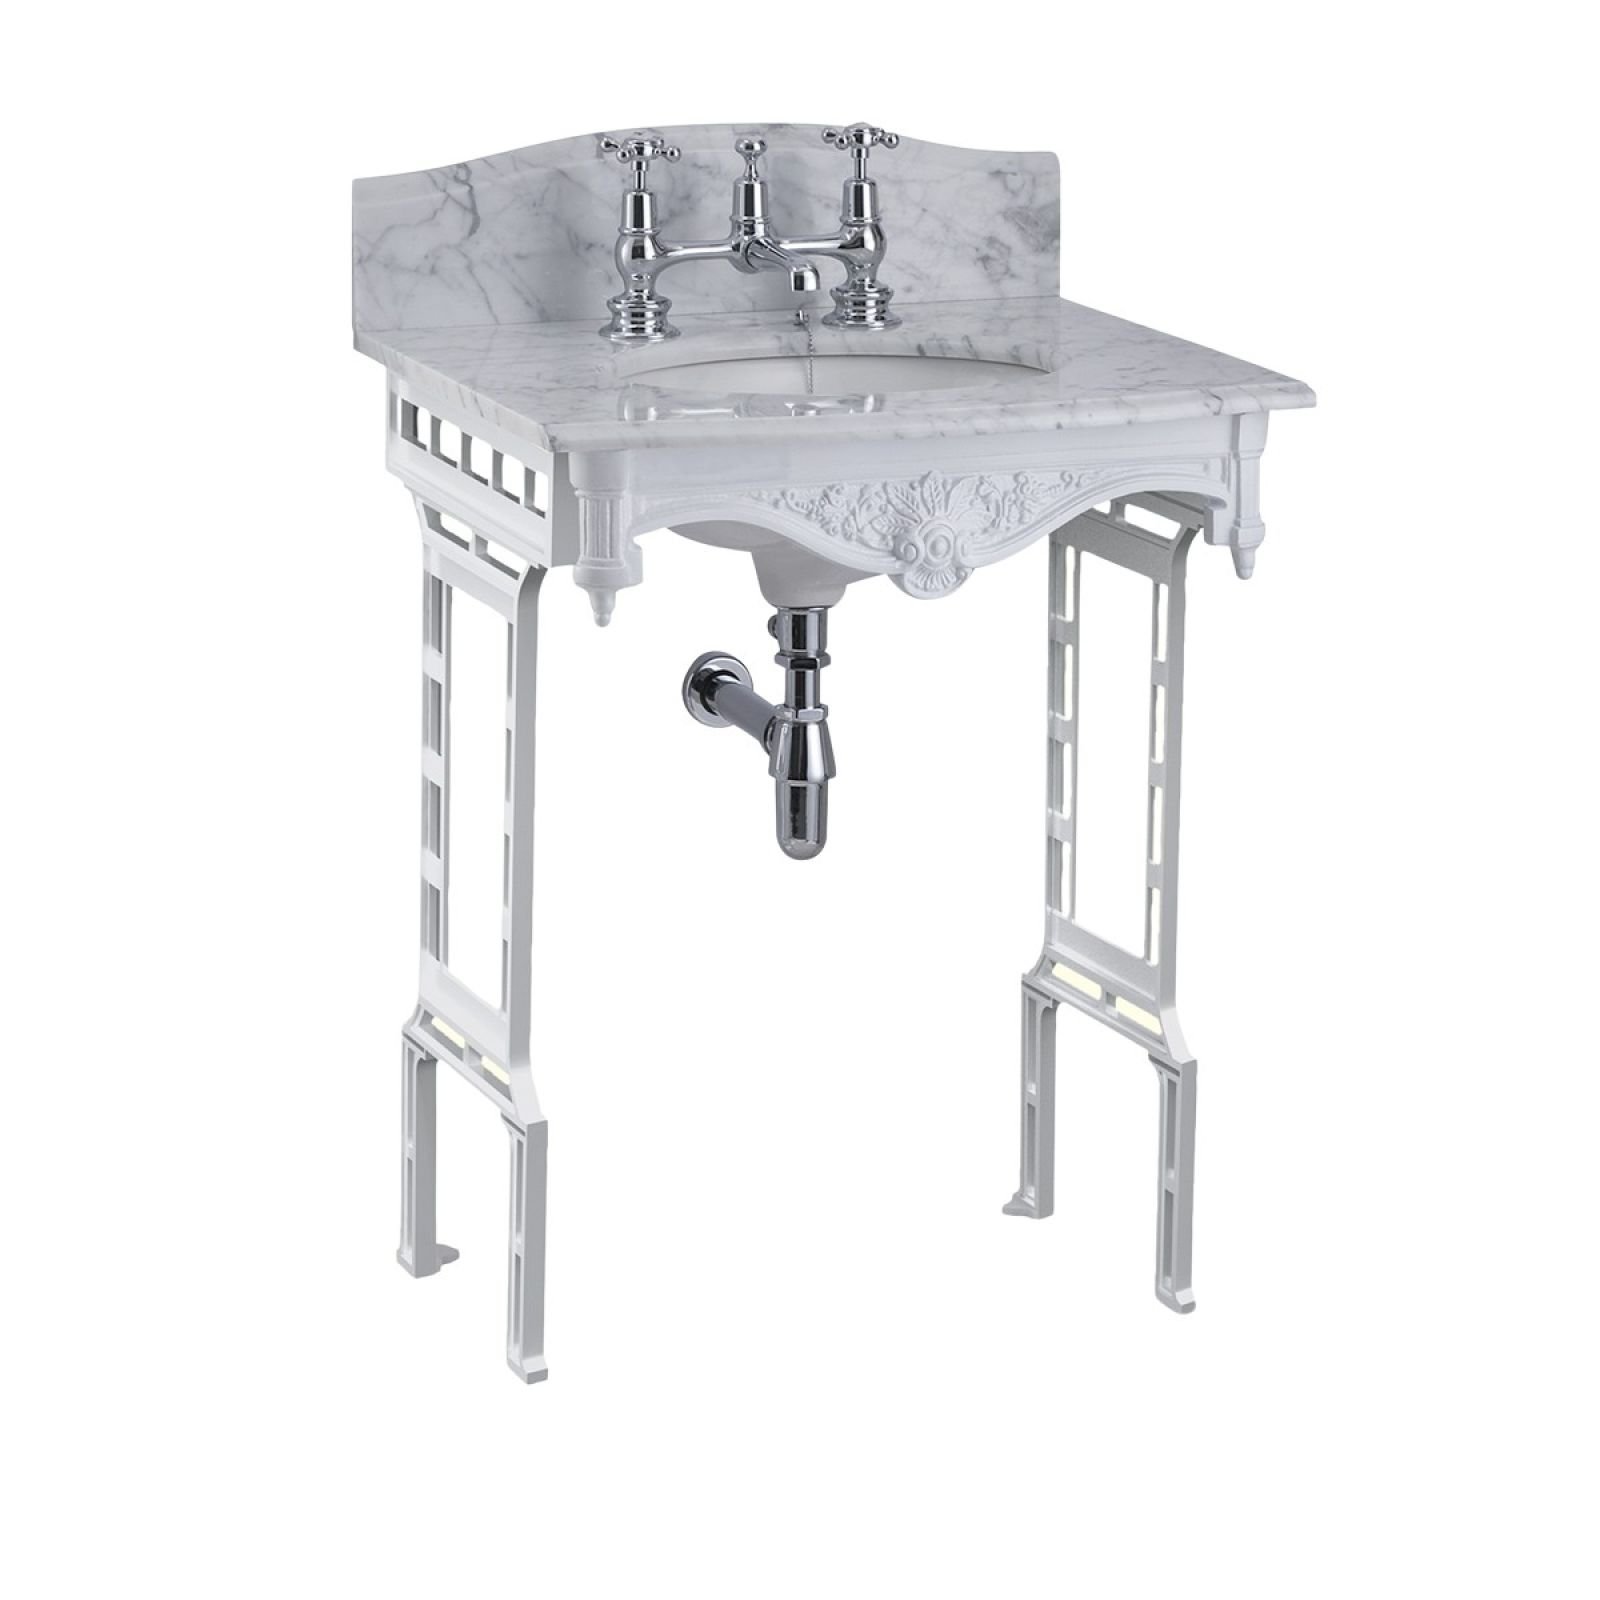 Classic Georgian style marble washstand with inset basin